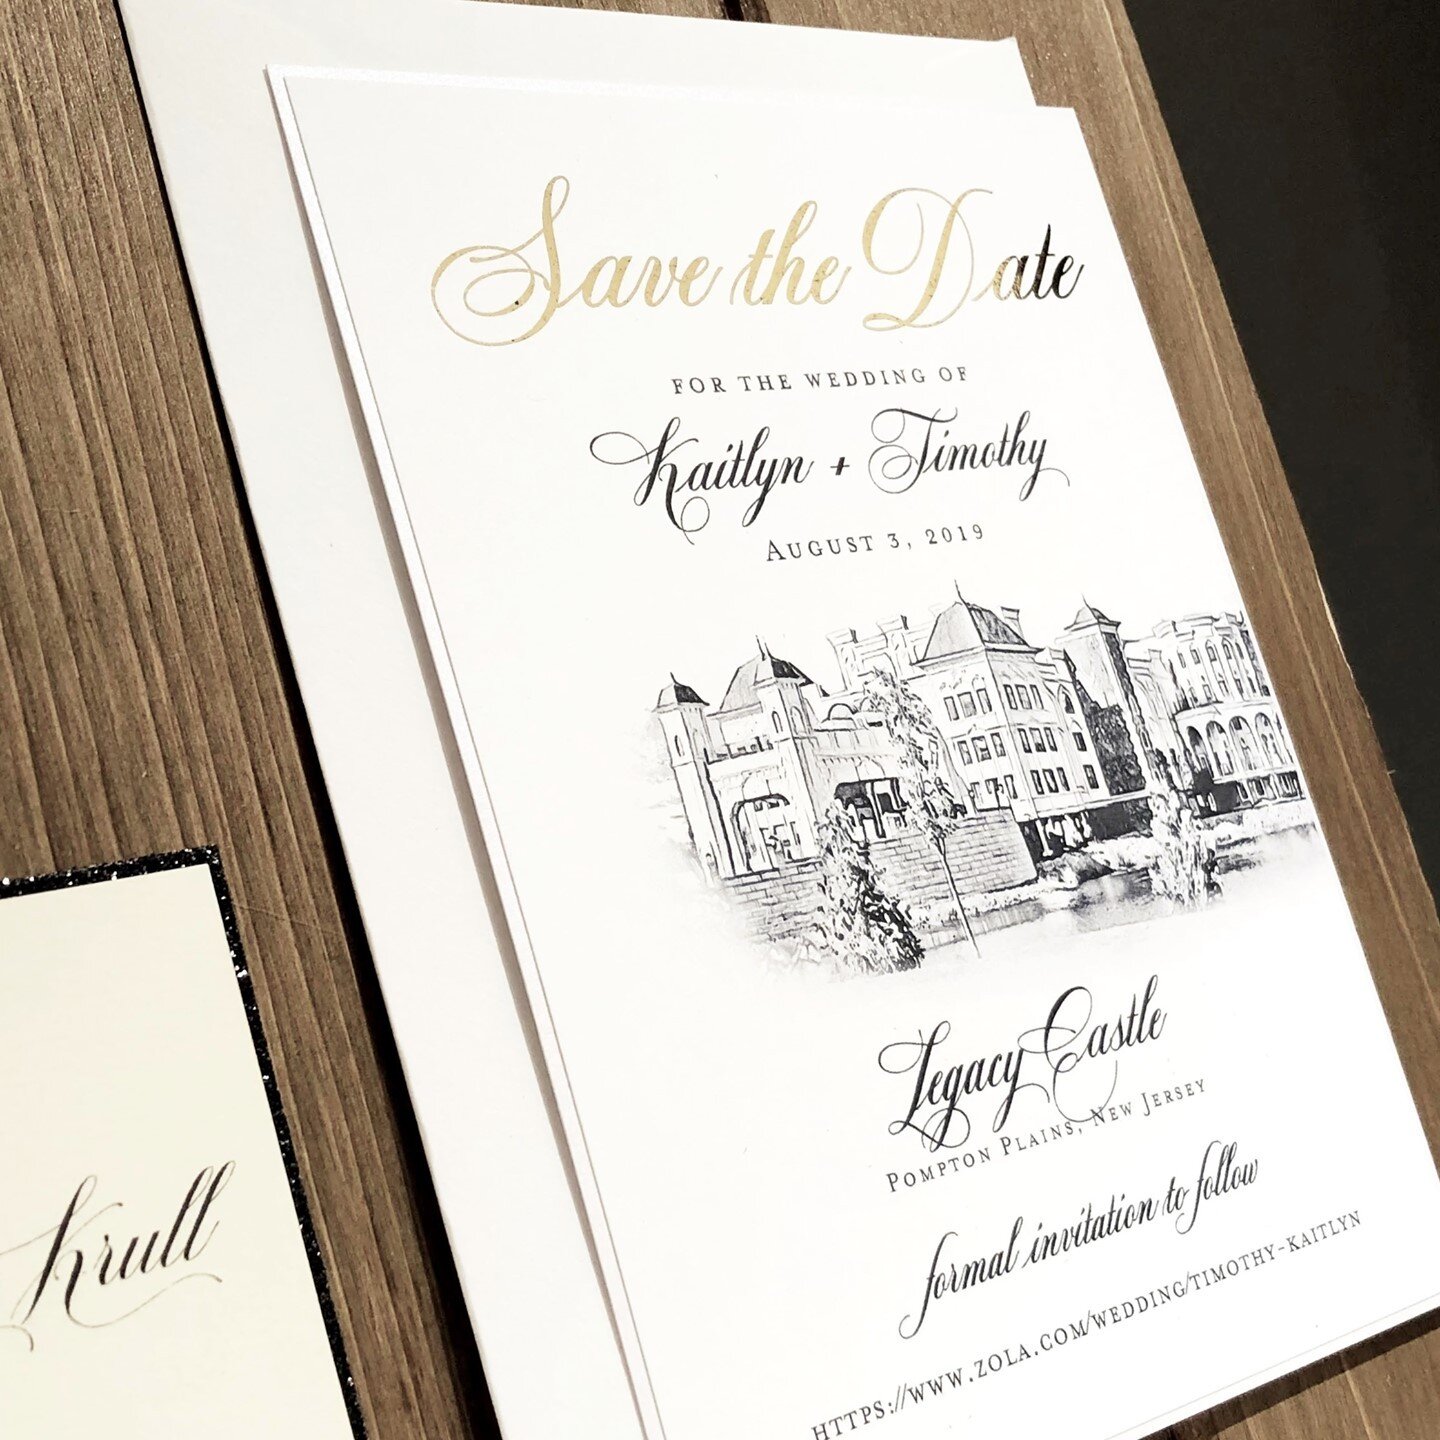 Gorg venue? Let's feature it on your stationery! There are so many ways to incorporate a venue image into an invitation or save the date. We can turn your venue into an emblem, watercolor, or a pencil drawing, like this one we did of @thelegacycastle